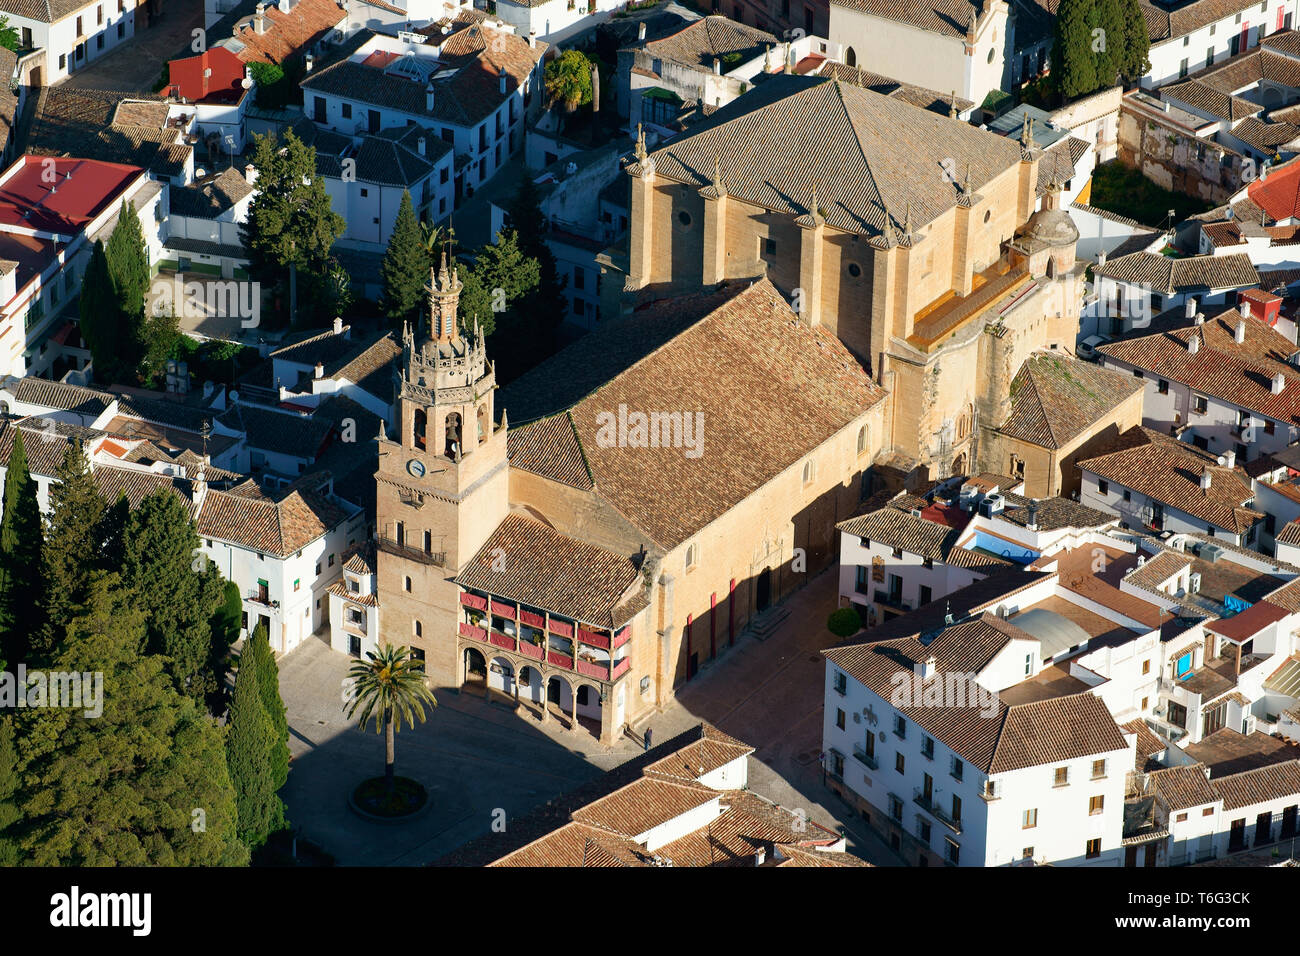 CHURCH OF SANTA MARIA LA MAYOR IN THE OLD TOWN OF RONDA (aerial view). Andalusia, Spain. Stock Photo